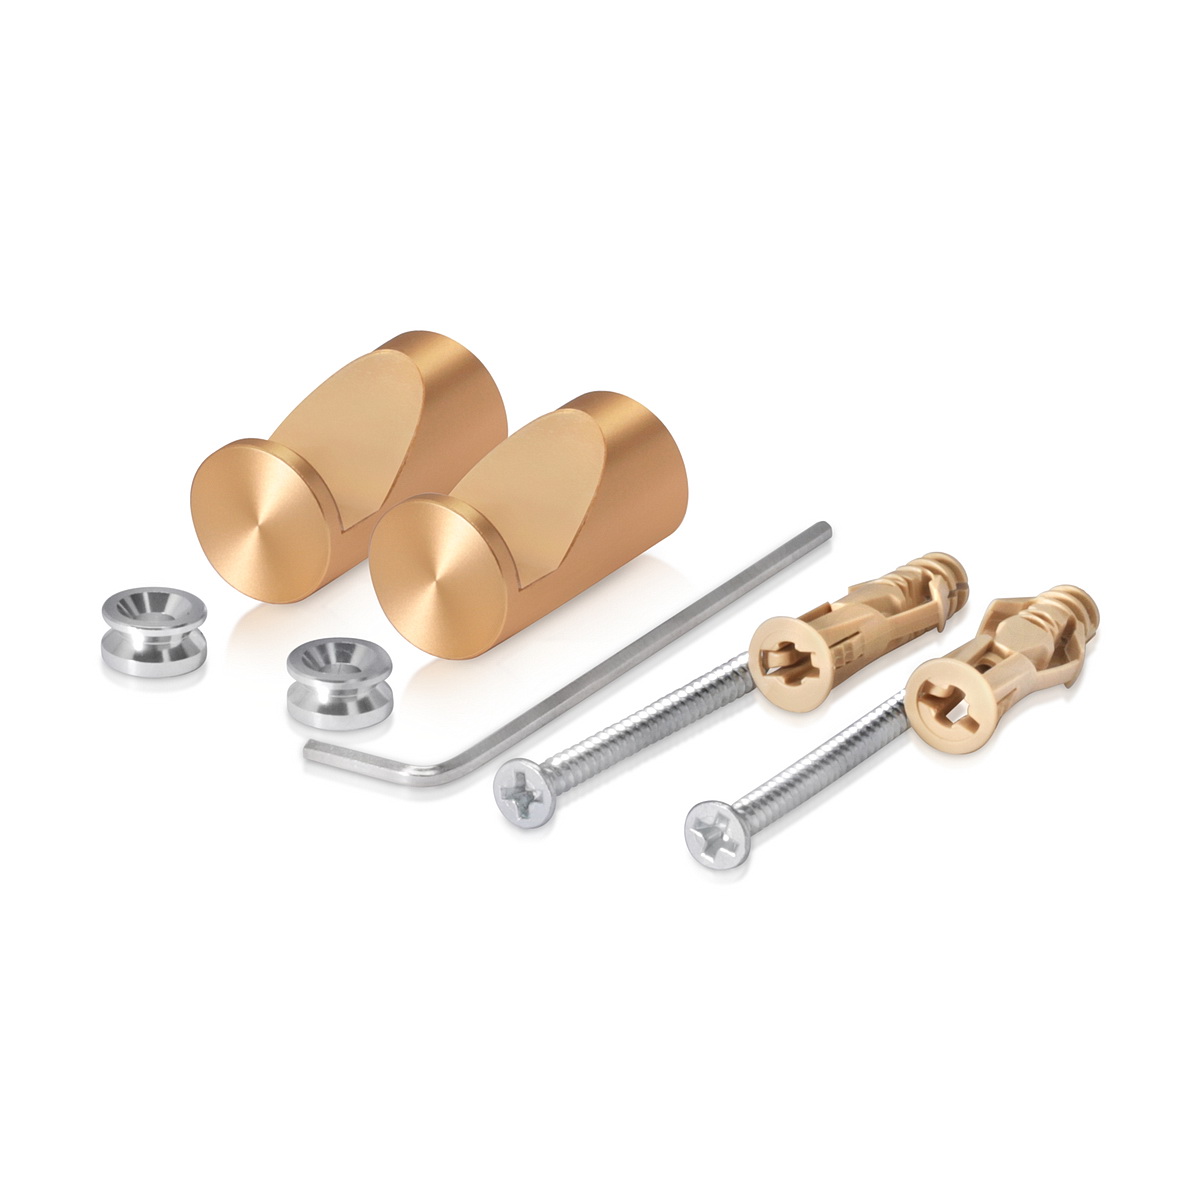 Set of 2 pieces of Cell Phone / Tablet Aluminum Standoffs, Gold Anodized Finish